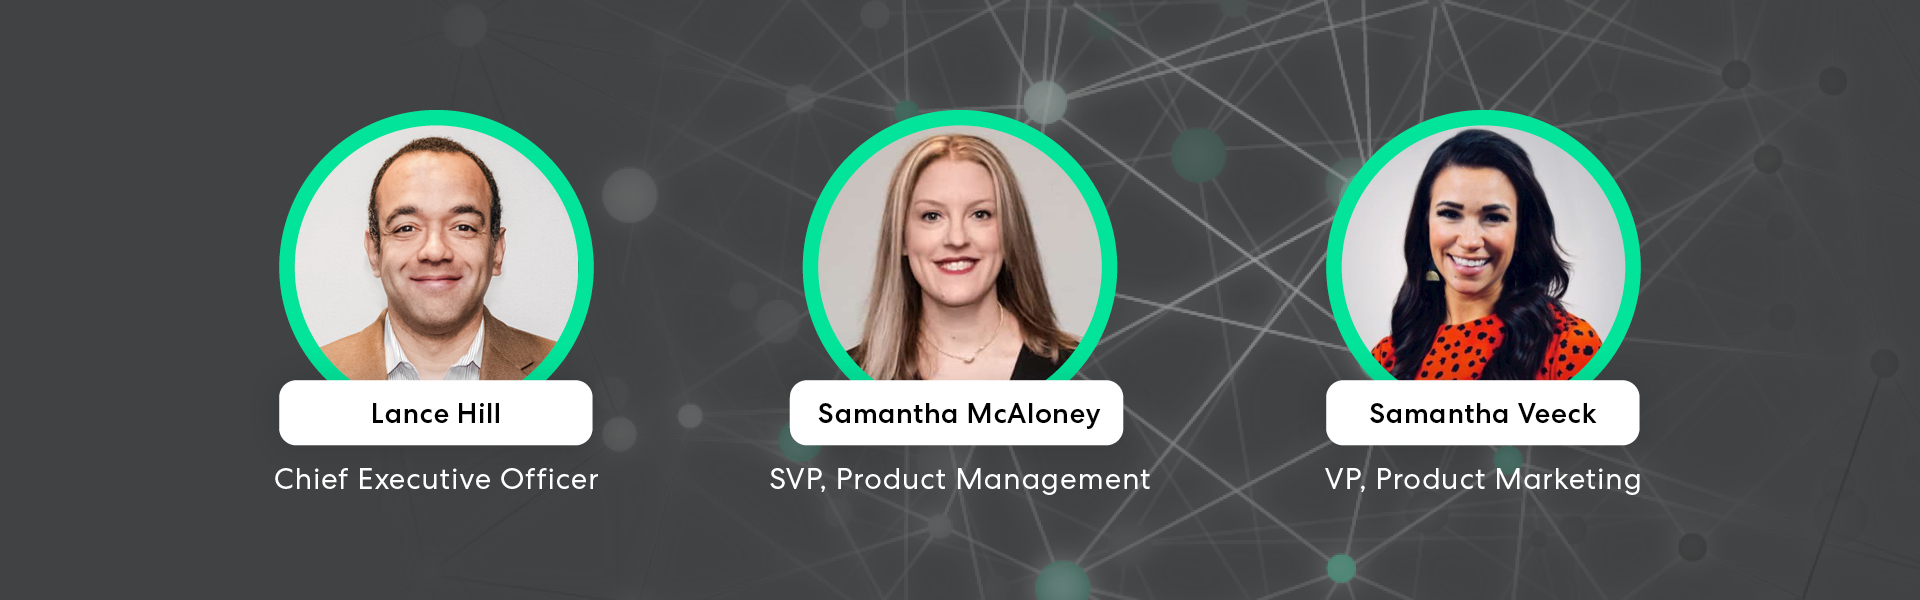 Headshots of the speakers with an abstract technology background illustration. Lance Hill, Chief Executive Officer. Samantha McAloney, SVP, Product Management. Samantha Veeck, VP Product Marketing.